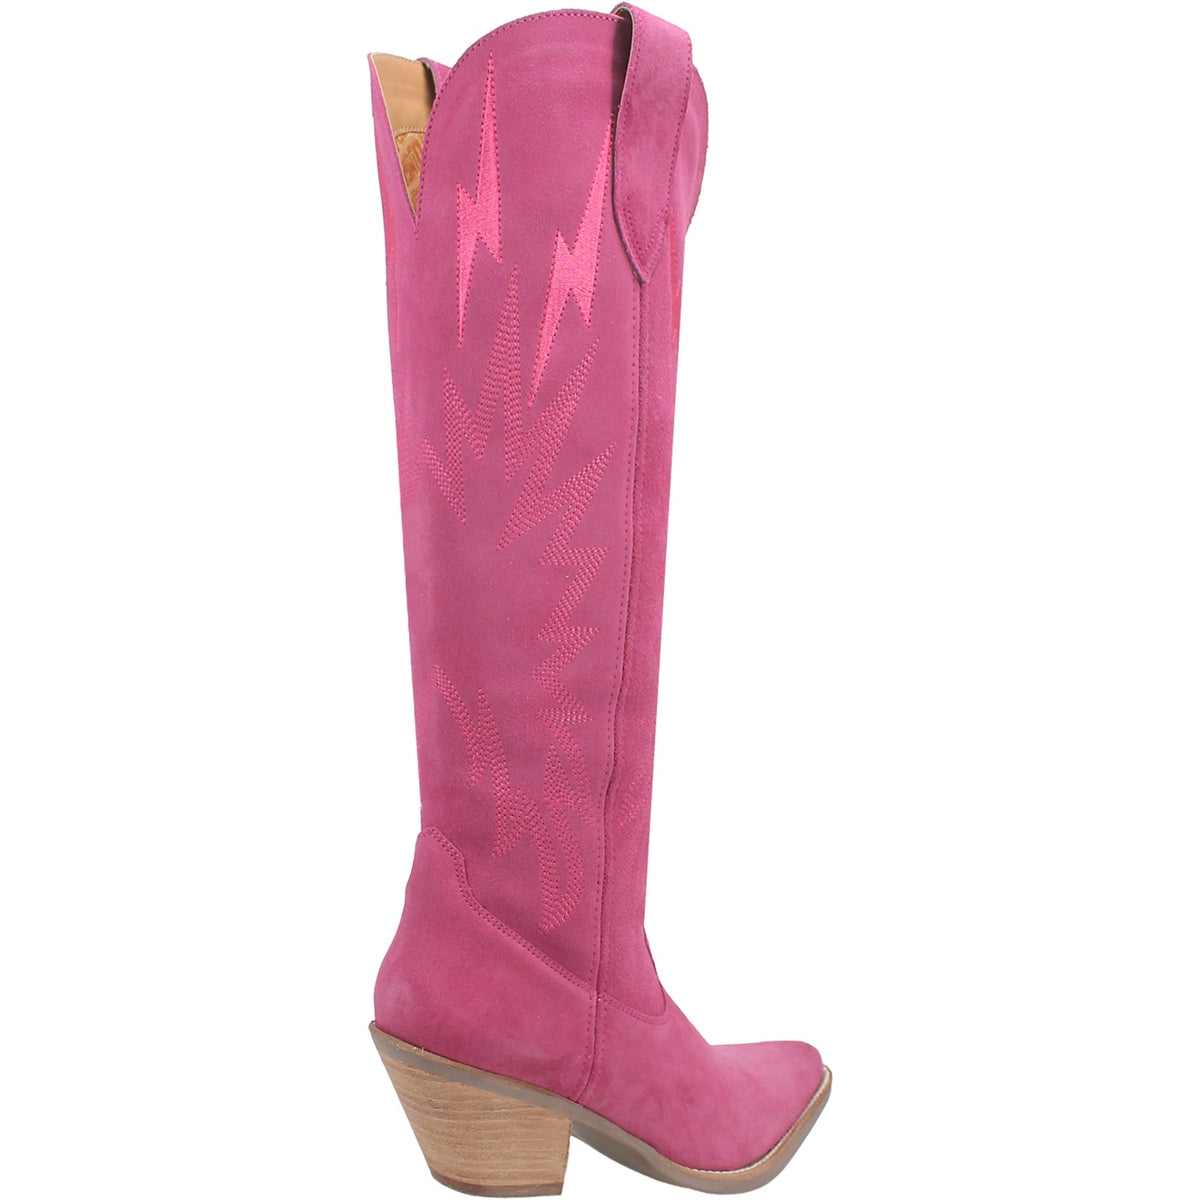 Thunder Road Leather Boot in Fuchsia